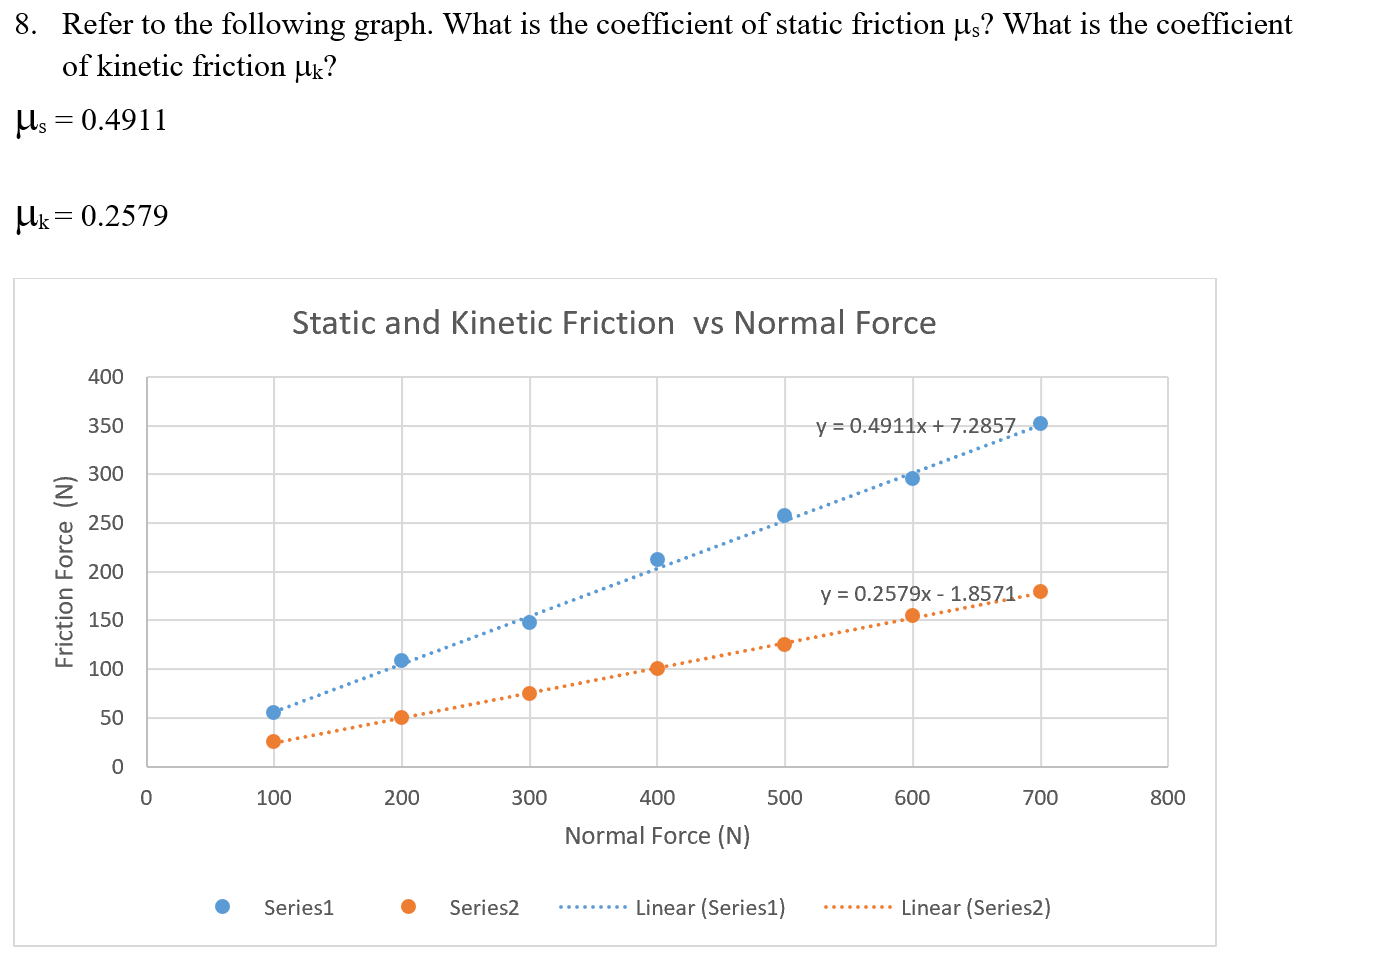 coefficient of friction graph